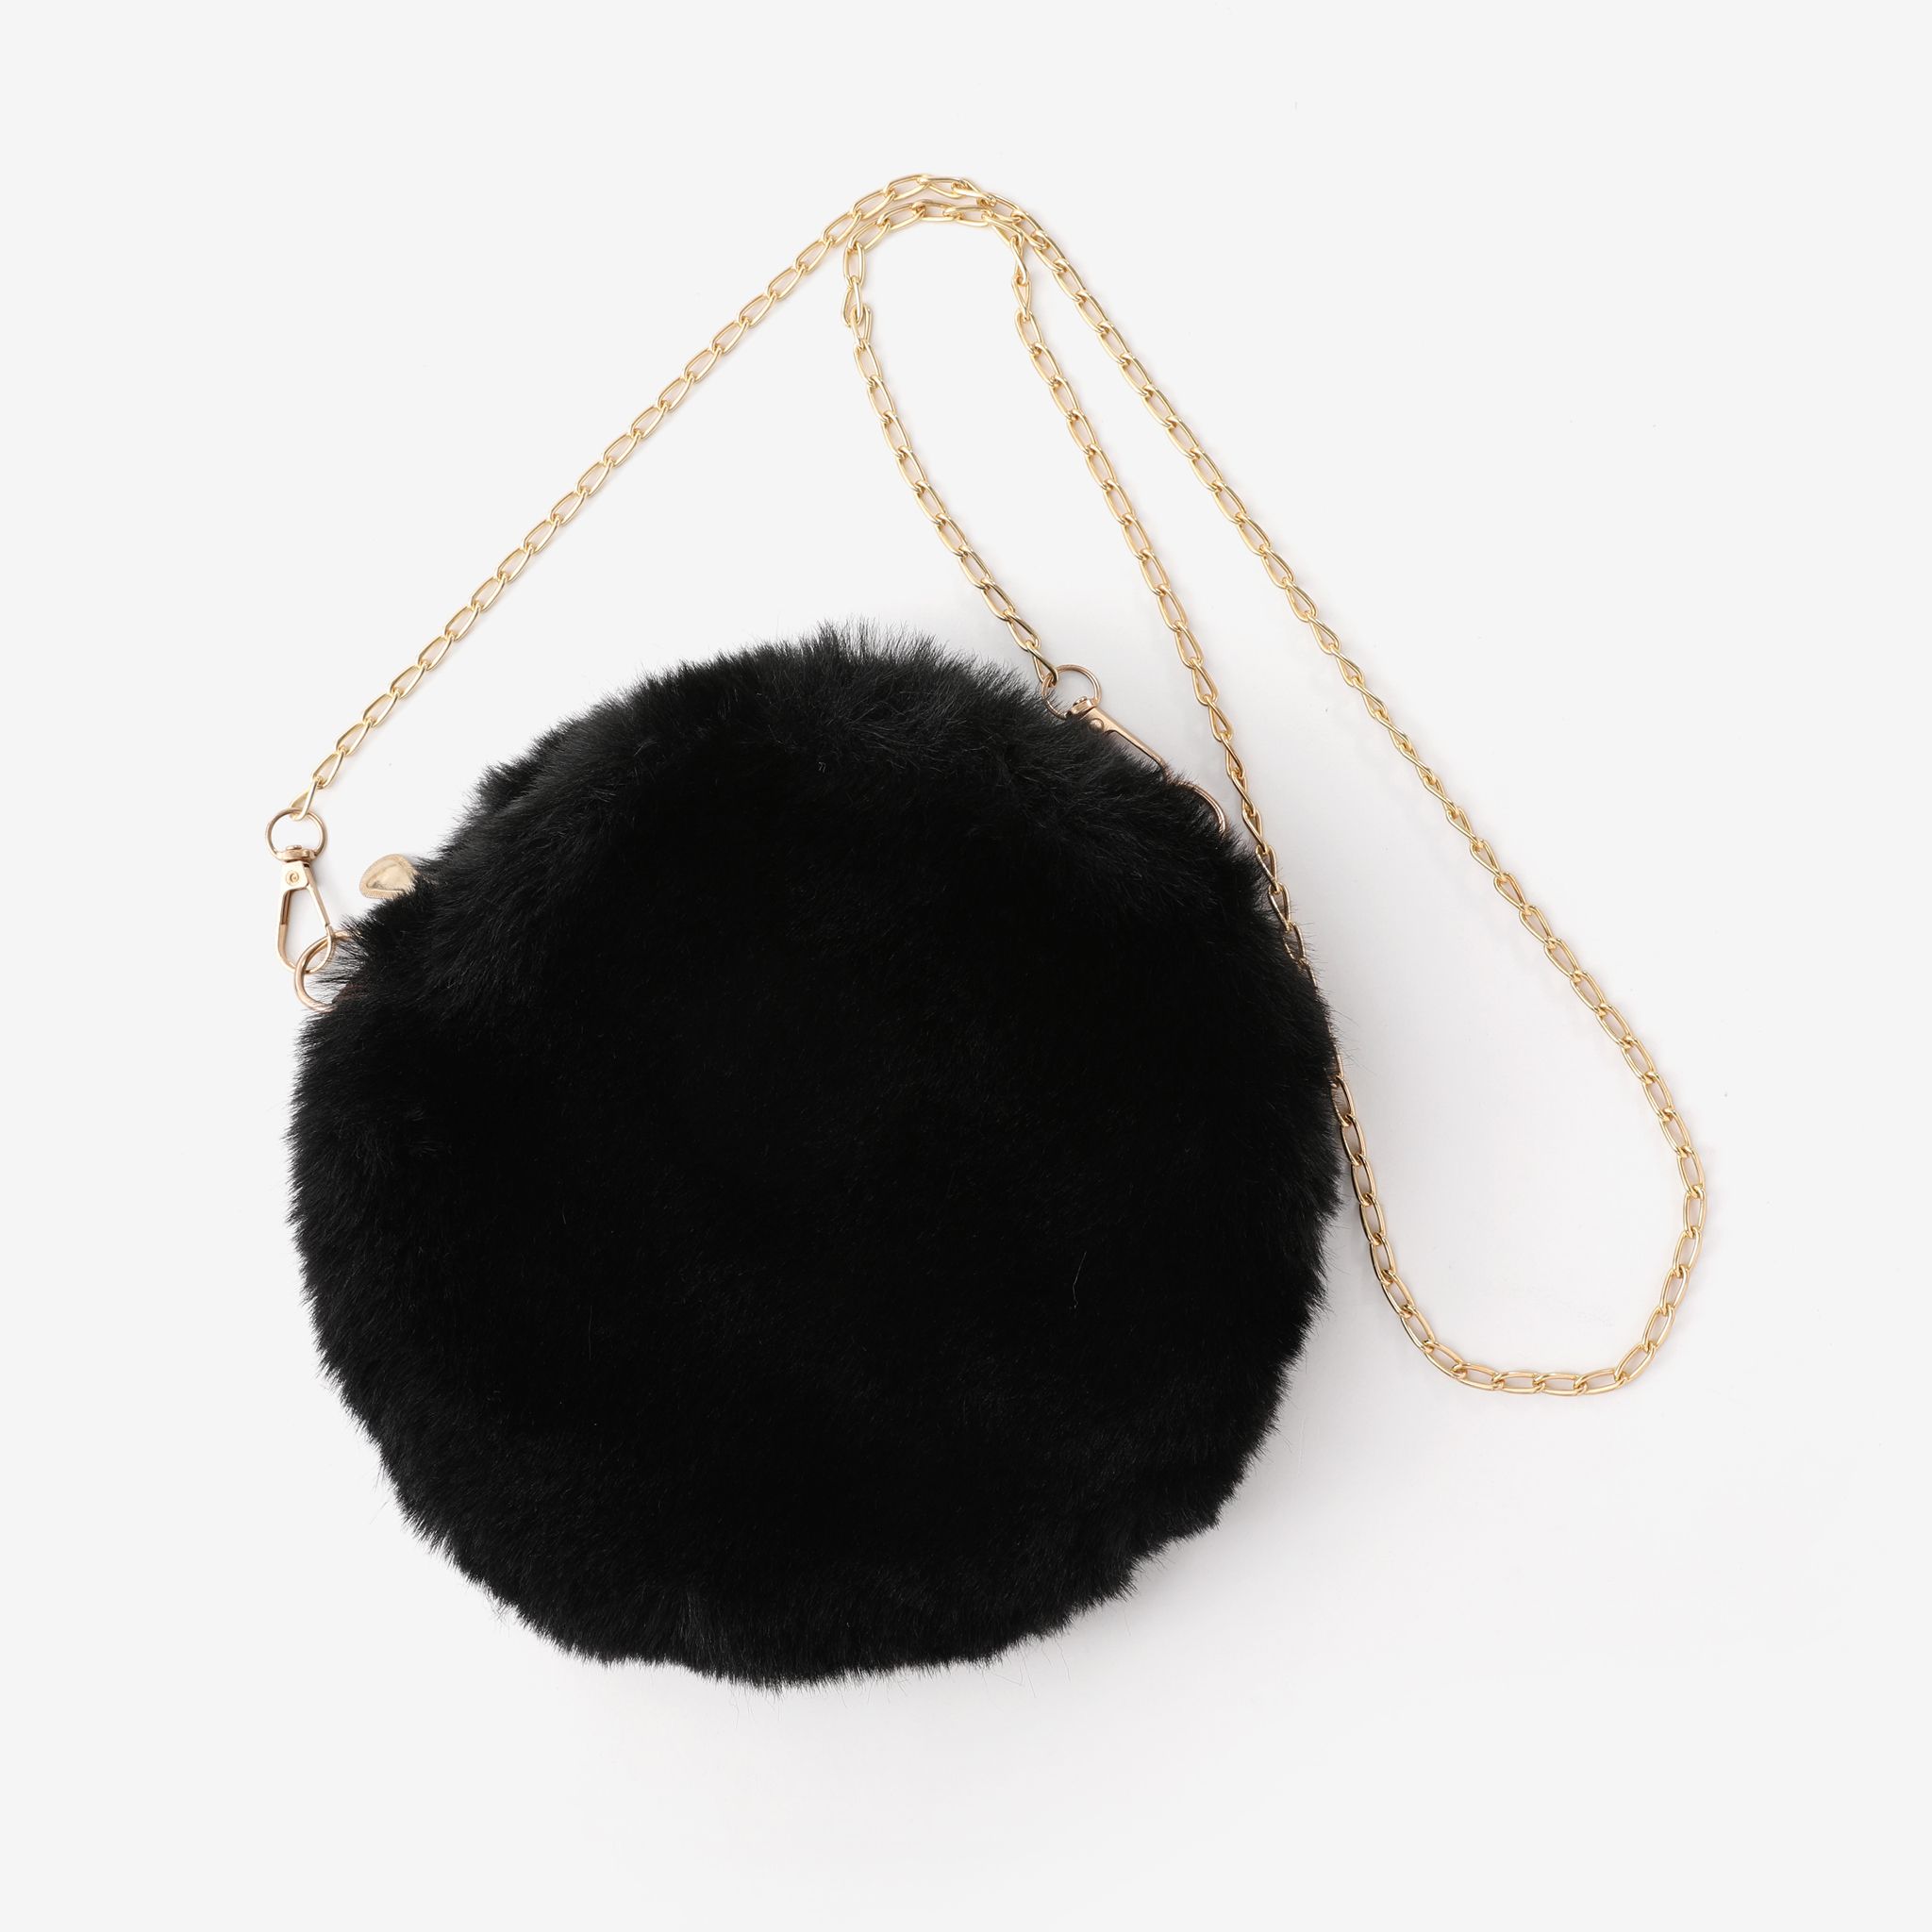 Toddler/kids/adult Simple Round Plush Chain Bag